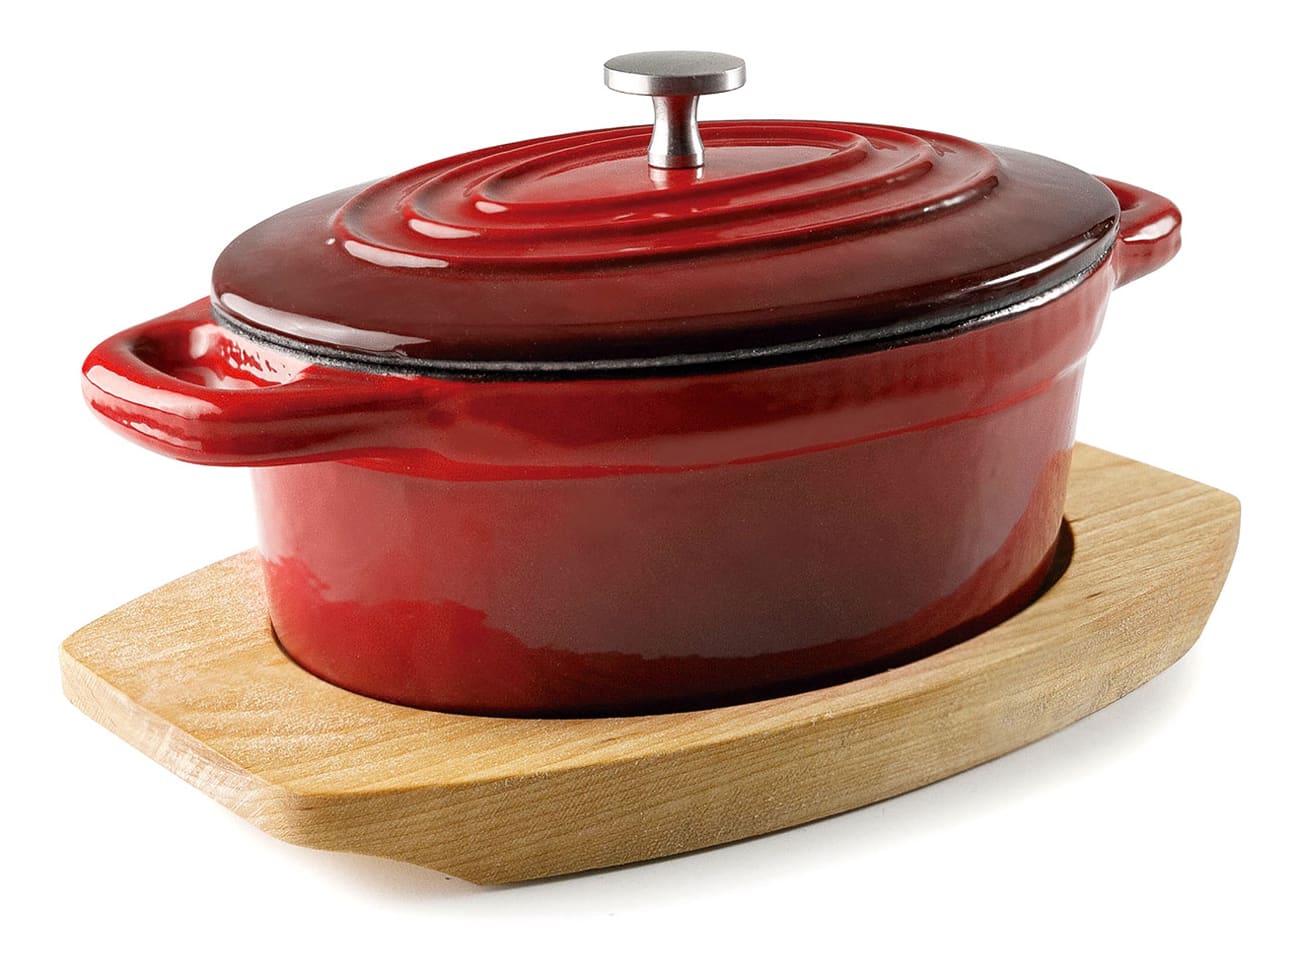 https://files.meilleurduchef.com/mdc/photo/product/lac/red-cast-iron-oval-mini-casserole/red-cast-iron-oval-mini-casserole-1-main-1300.jpg